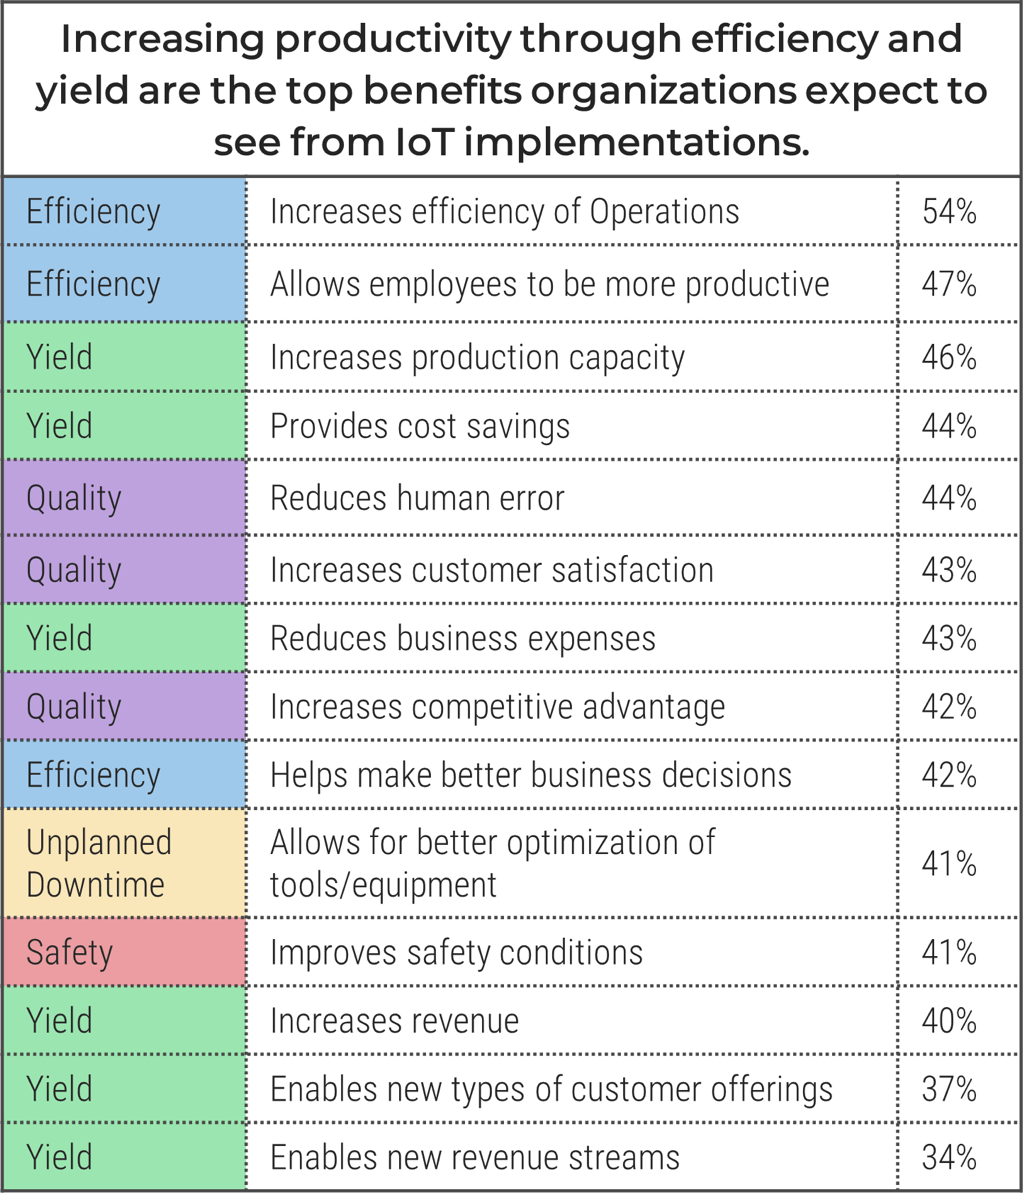 Table titled 'Increasing productivity through efficiency and yield are the top benefits organizations expect to see from IoT implementations' with three columns, one for type of benefit (ie efficiency, yield, quality, etc), one for different IoT implementations and one for percent increase.